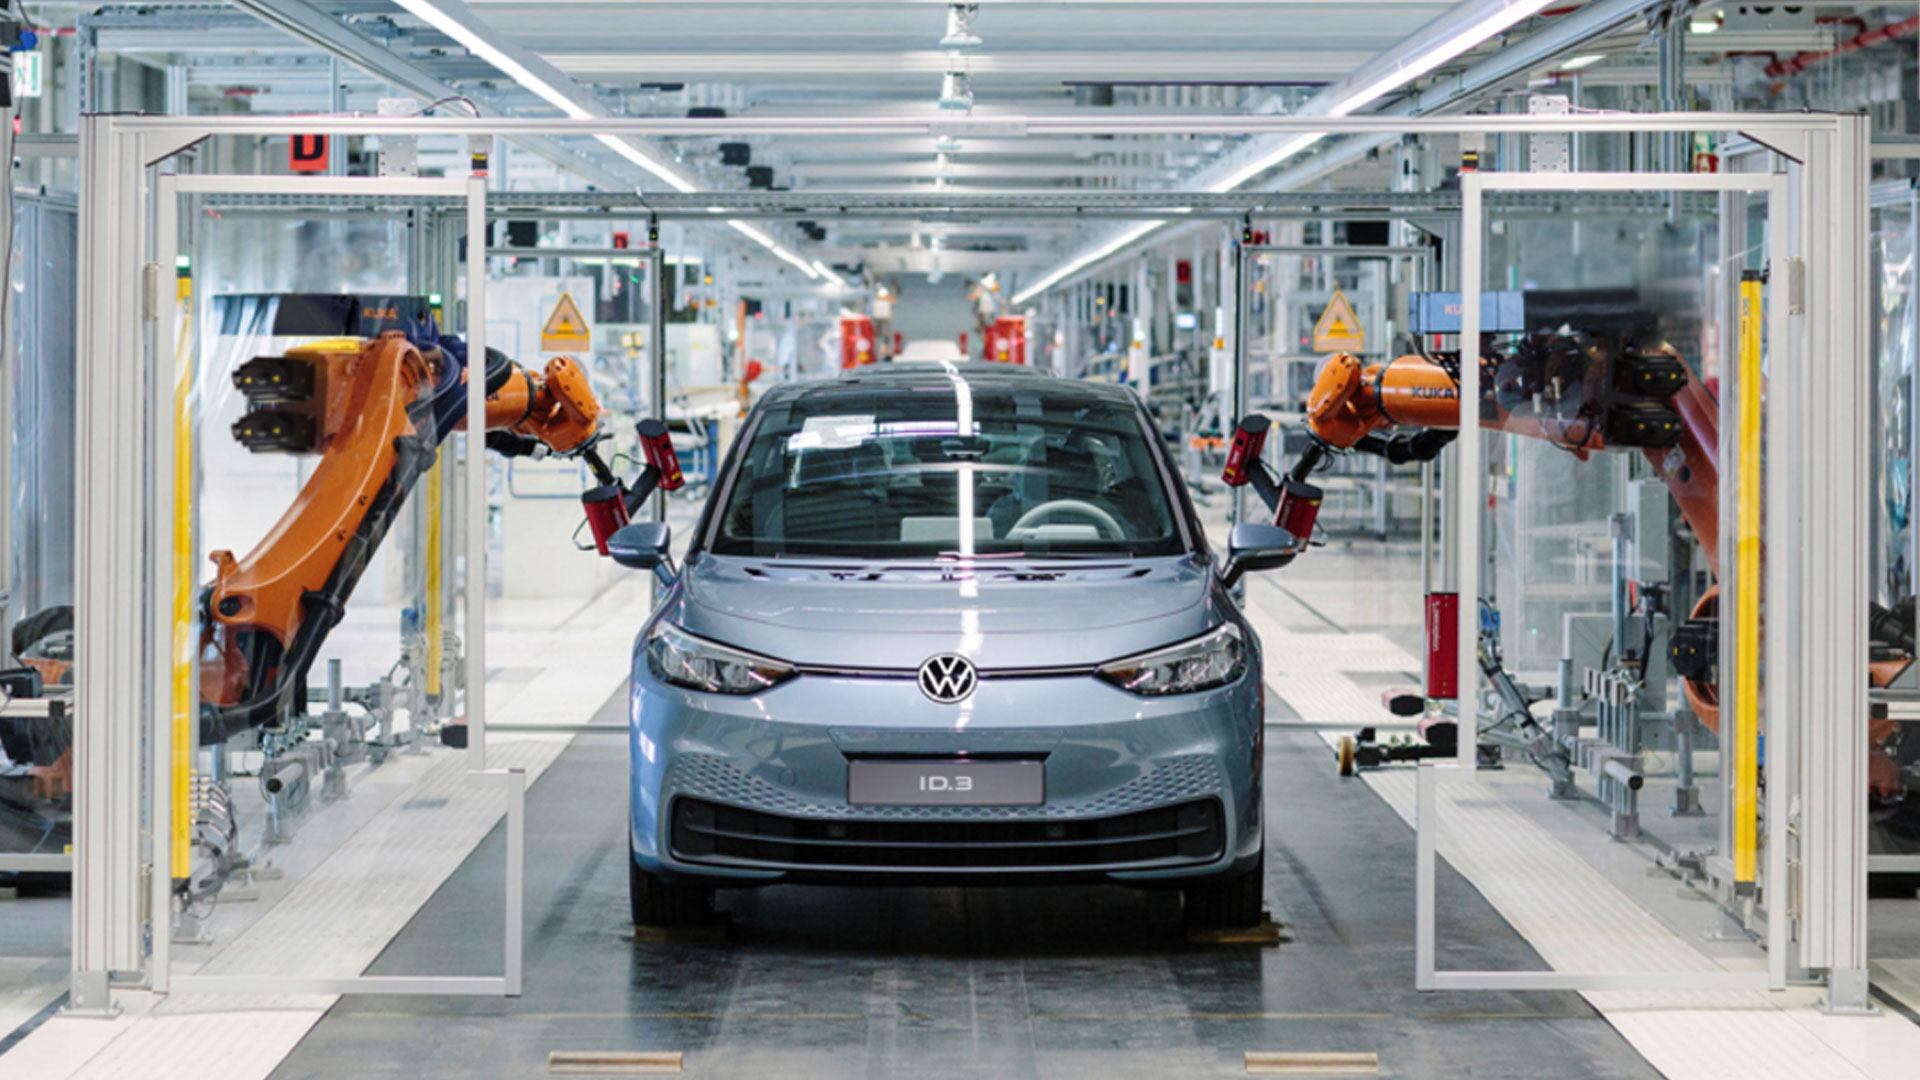 Amorph Systems is excited to join Volkswagen and AWS to accelerate production, logistics and supply chain management into the Digital Age. - amorph.pro